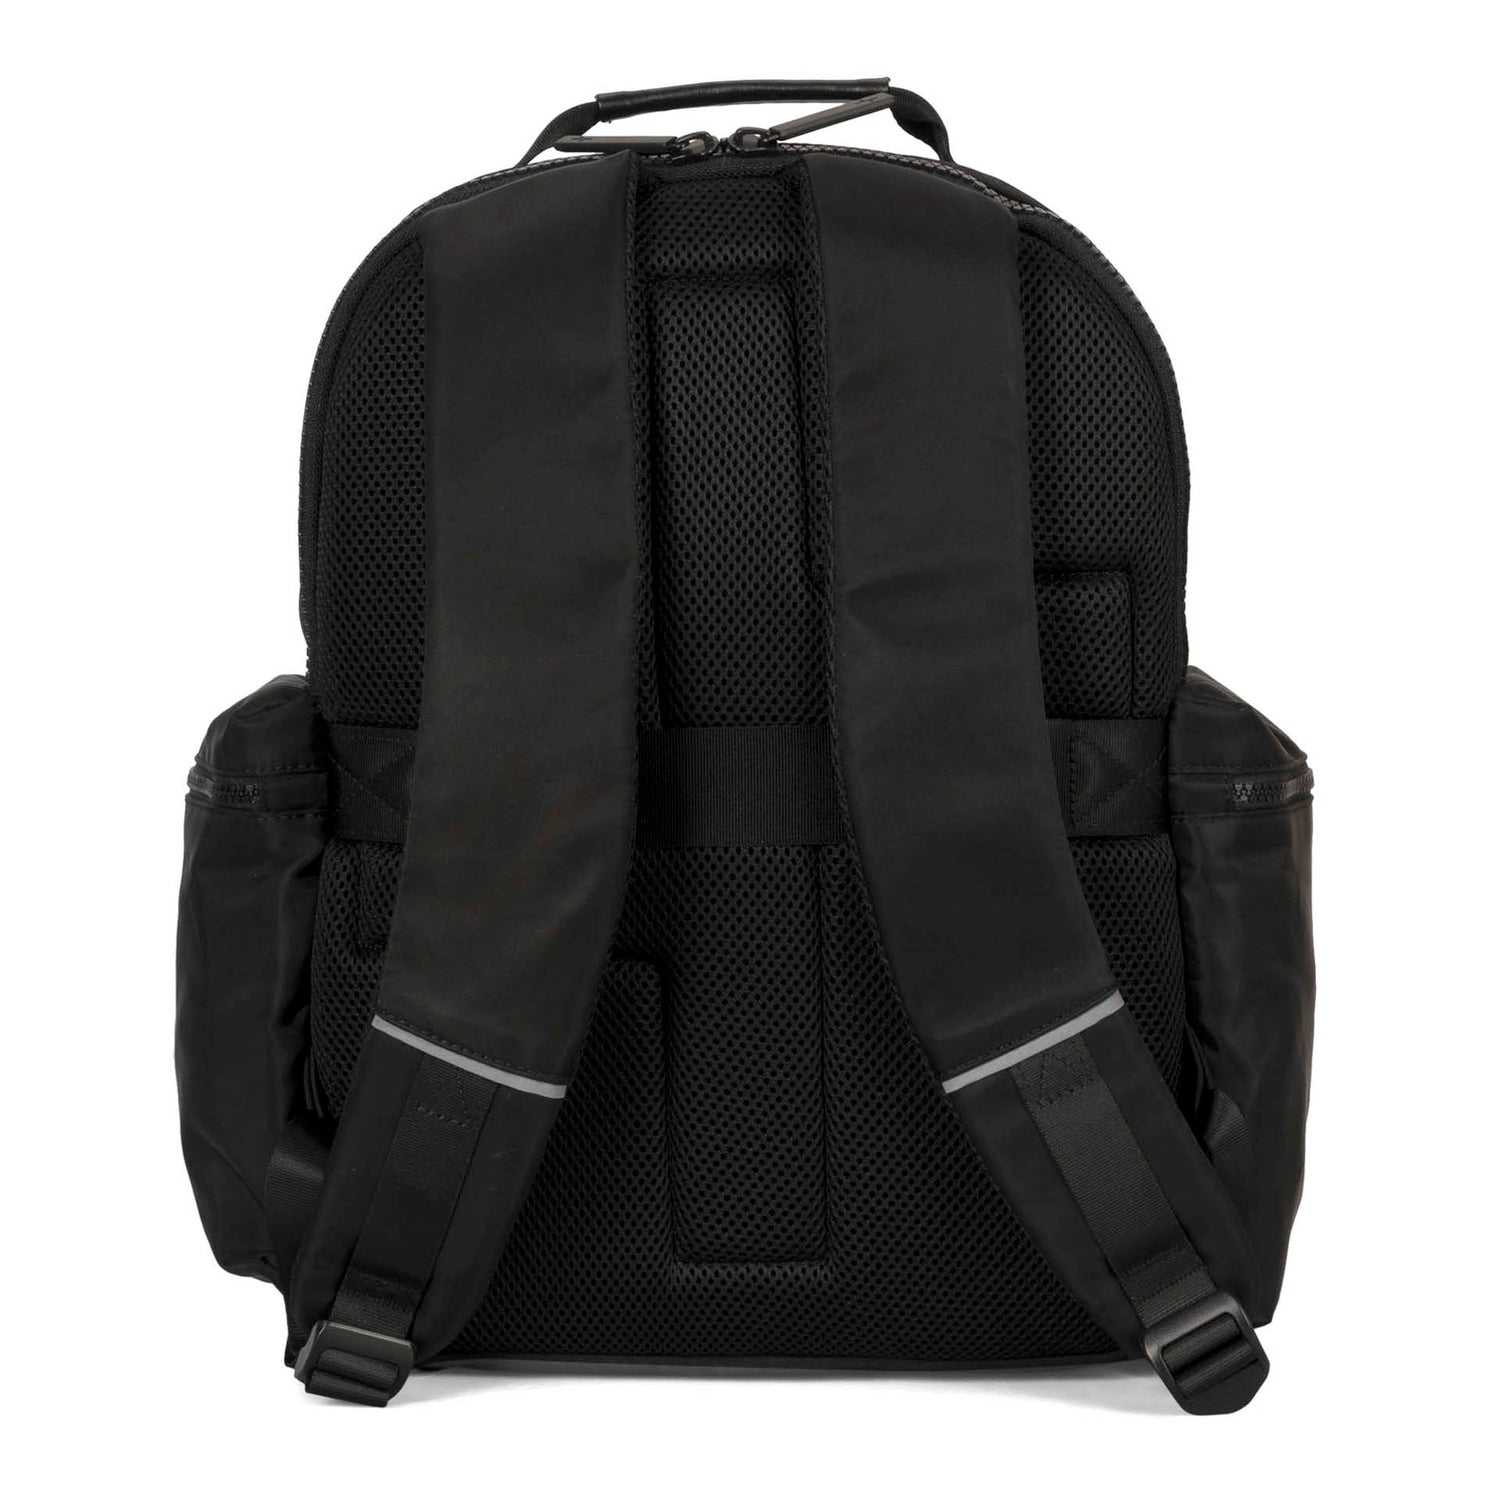 Back side view of a black backpack called Sutton by Tracker on white background, showcasing its padded back panel, top handle, padded straps, and 2 side zipper pockets. 